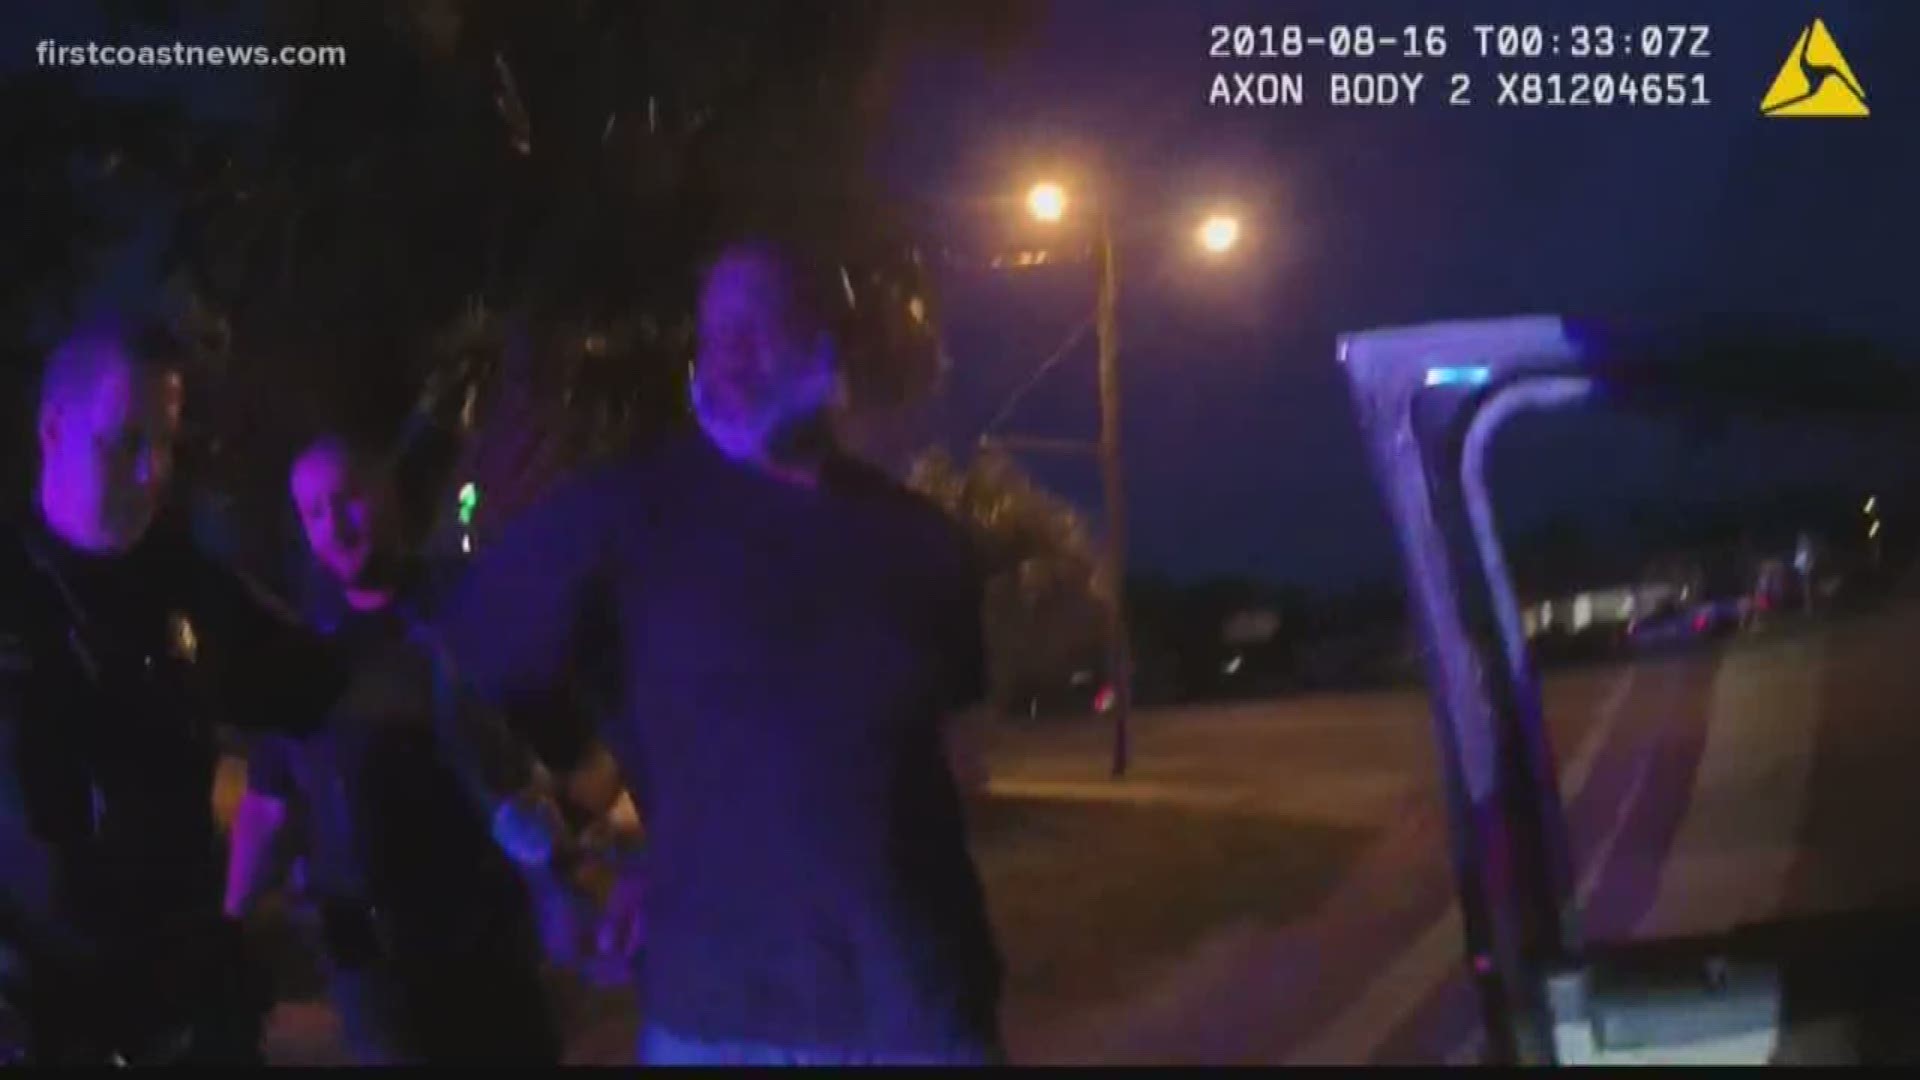 Dramatic body cam footage shows a man reaching for his gun during a traffic stop in Palatka.